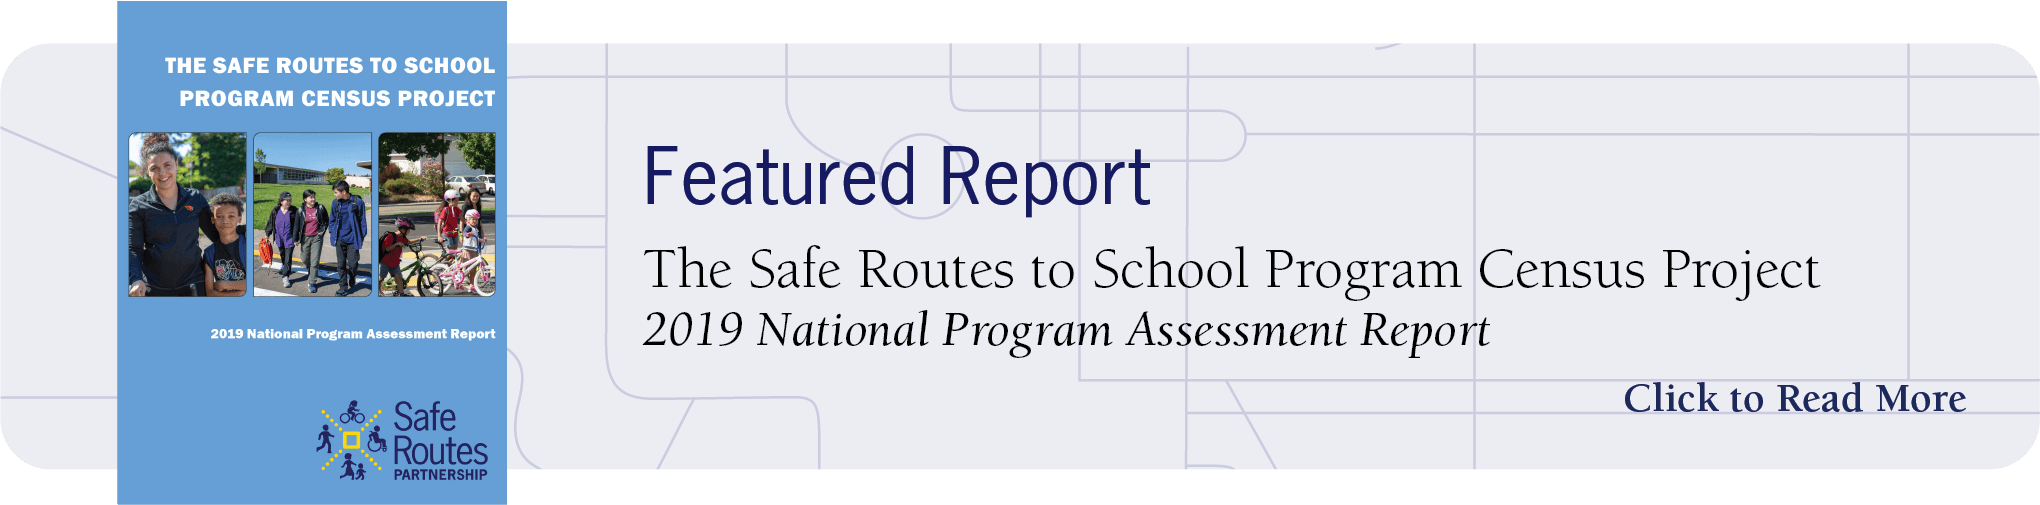 The Safe Routes to School Program Census Project